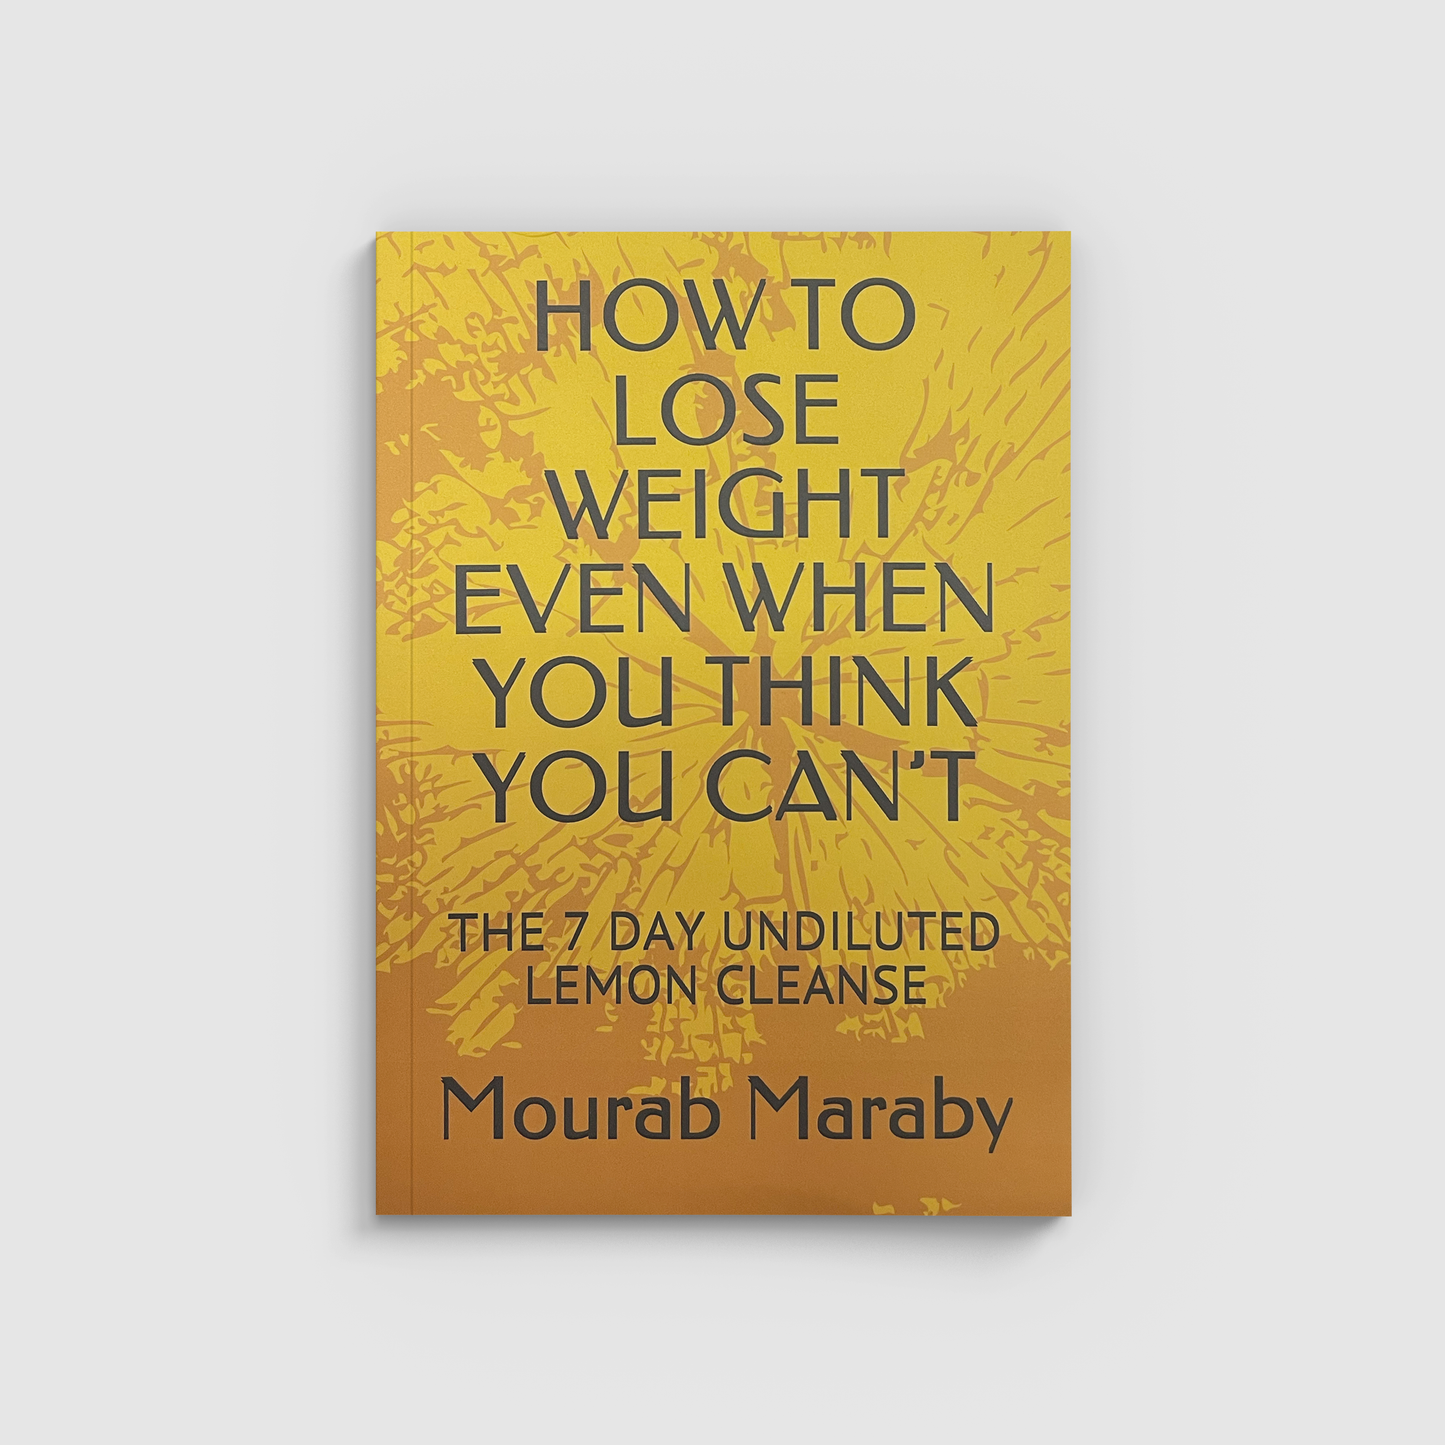 How To Lose Weight Even When You Think You Can’t (Signed Version)